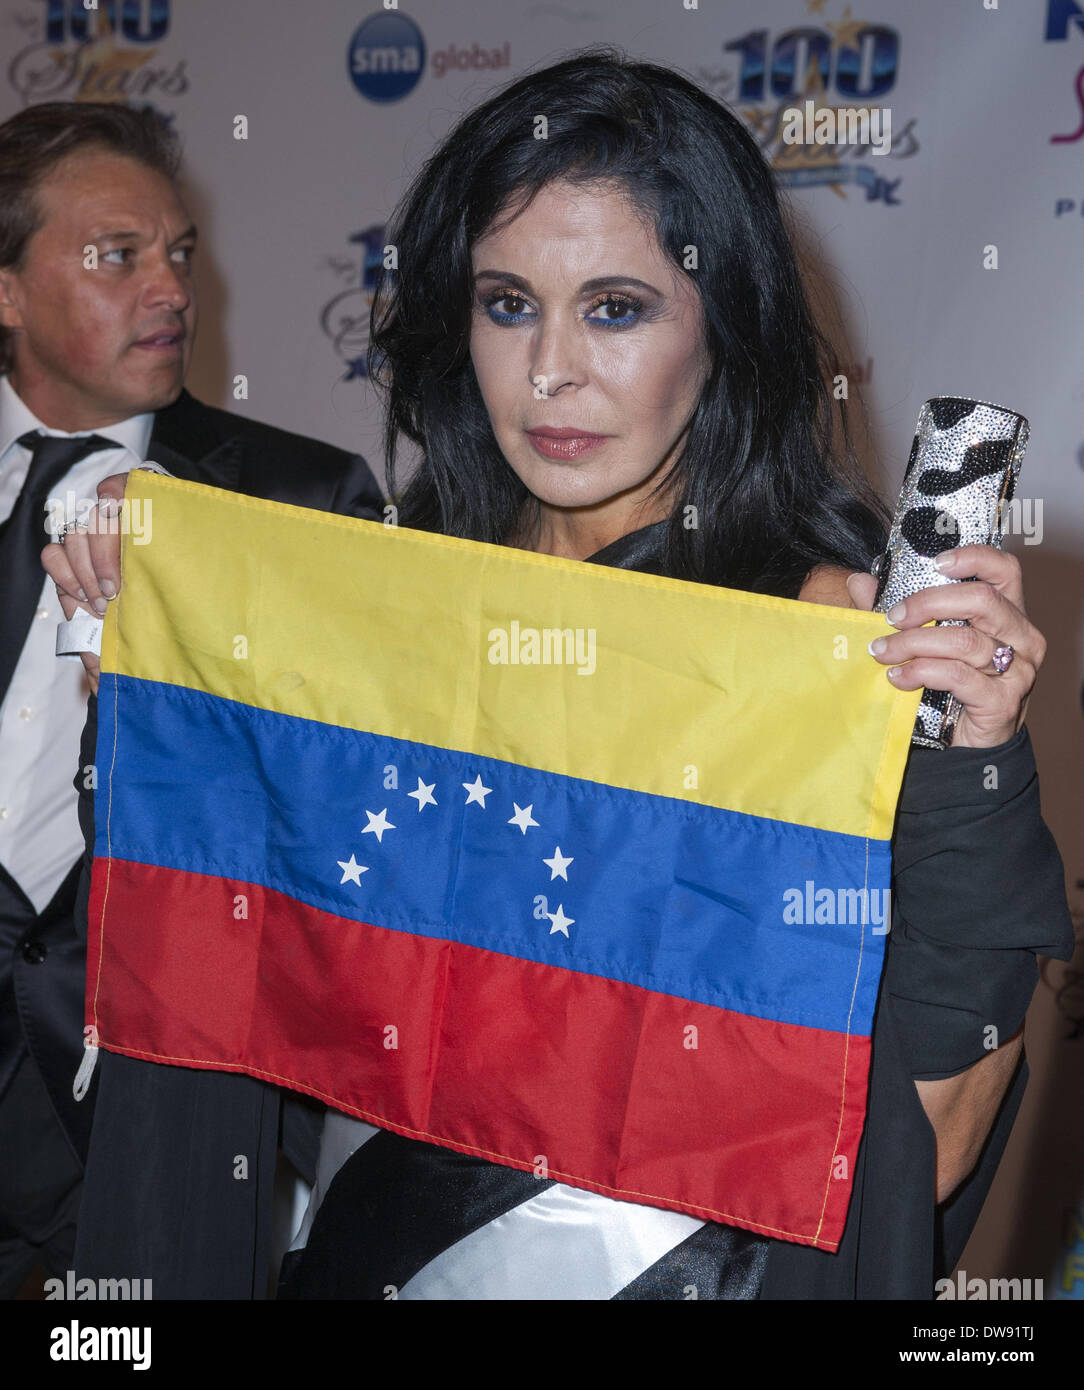 March 2, 2014 - Beverly Hills/Los Angeles, California, USA - Former Miss World 1975 for Venezuela, MARIA CONCHITA ALONSO, born in Cuba and raised in Venezuela, posed with the Venezuelan flag on the red carpet at the Night of 100 Stars 2014 Oscar viewing party on Sunday evening in the Sunset Room of the Beverly Hills Hotel. (Credit Image: © David Bro/ZUMAPRESS.com) Stock Photo